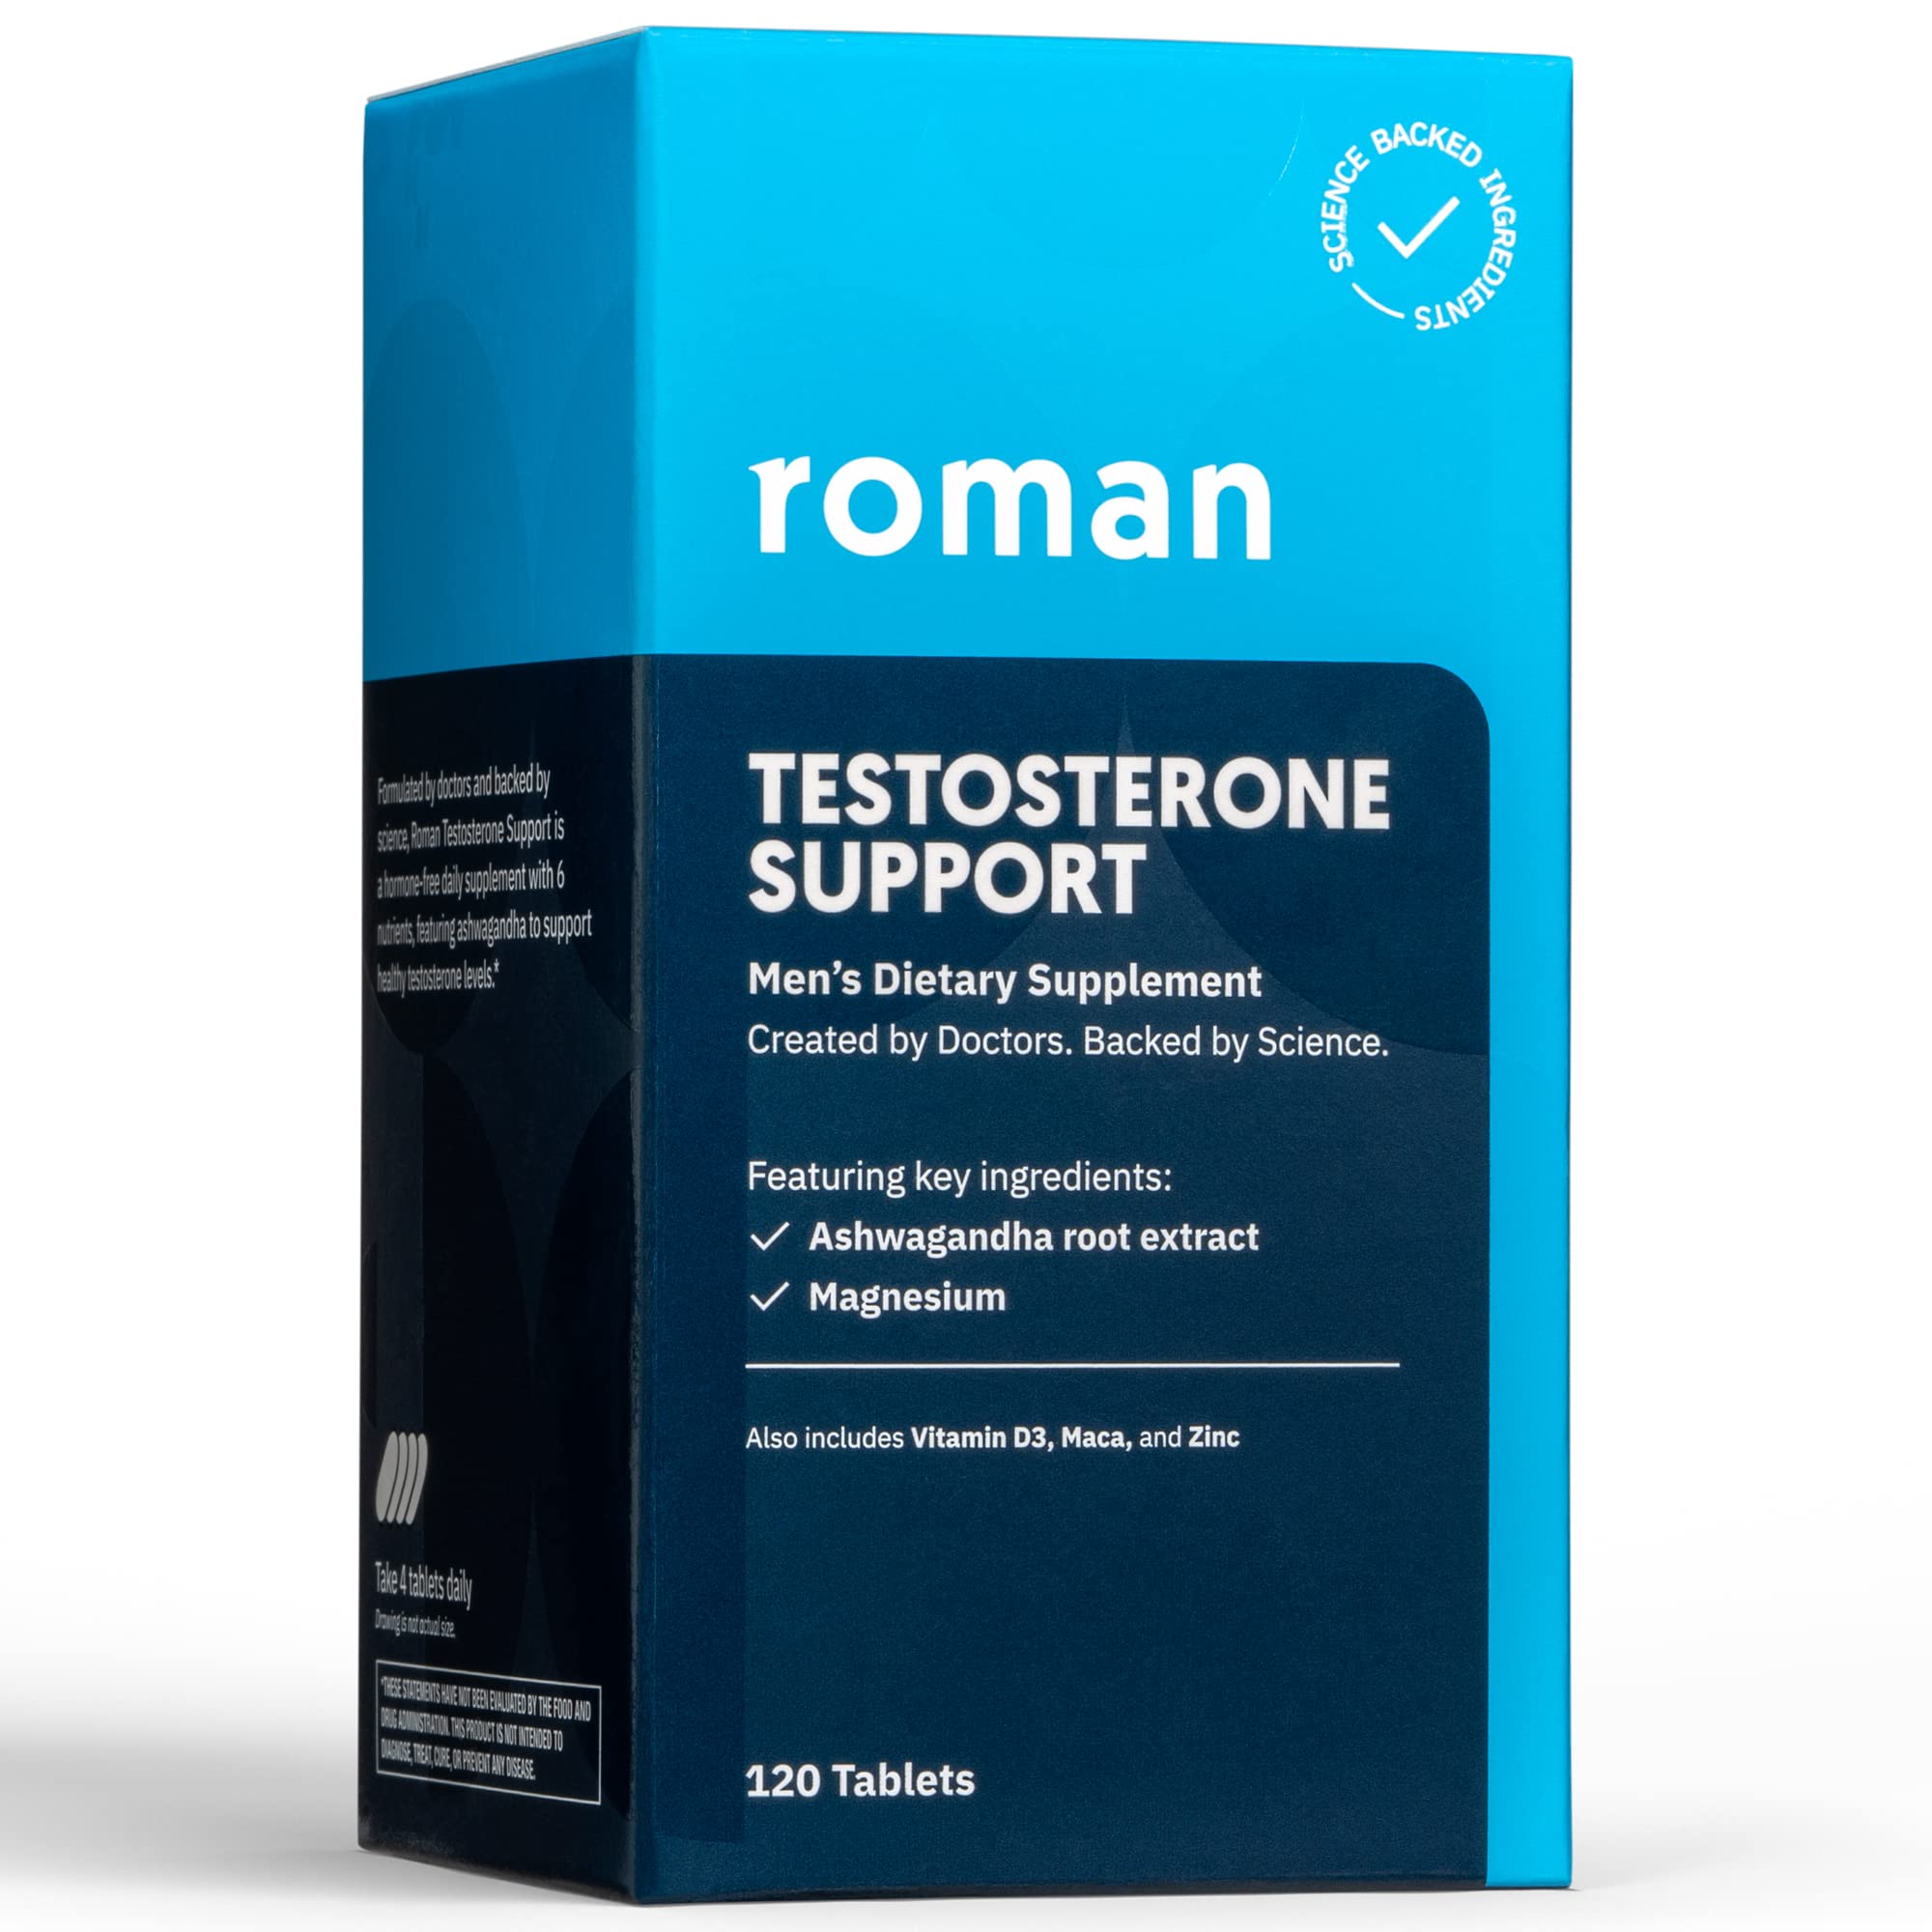 Roman Testosterone Support | Men's Daily Nutritional Supplement with Ashwagandha to Support Healthy T-Levels & Magnesium to Support Muscle Health | 30-Day Supply (120 Tablets)